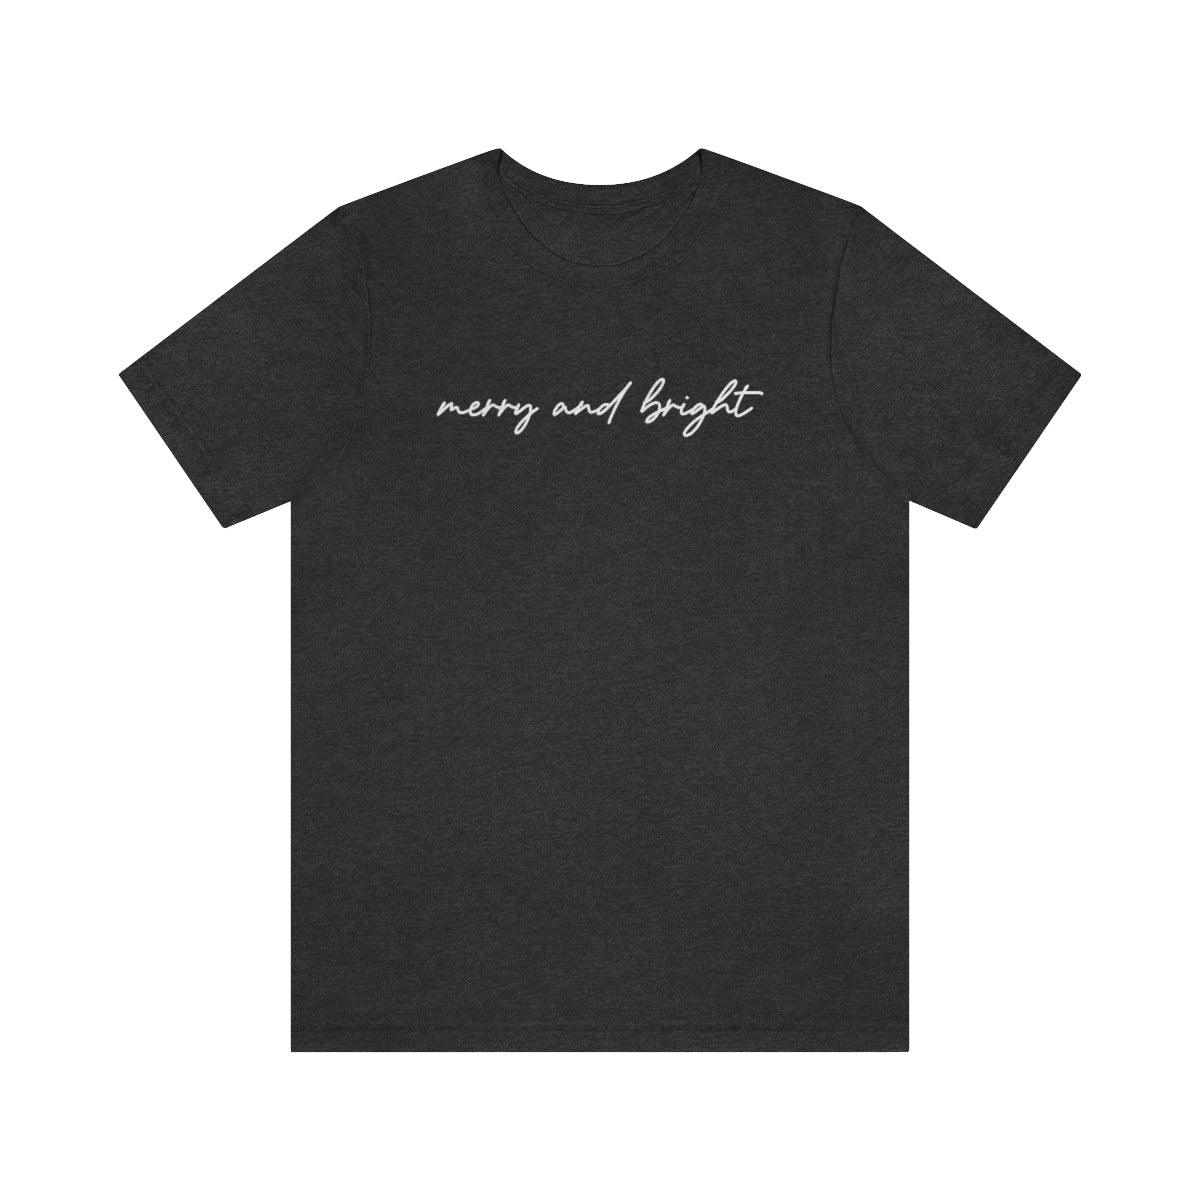 Merry and Bright Simple Christmas Shirt Short Sleeve Tee - Crystal Rose Design Co.